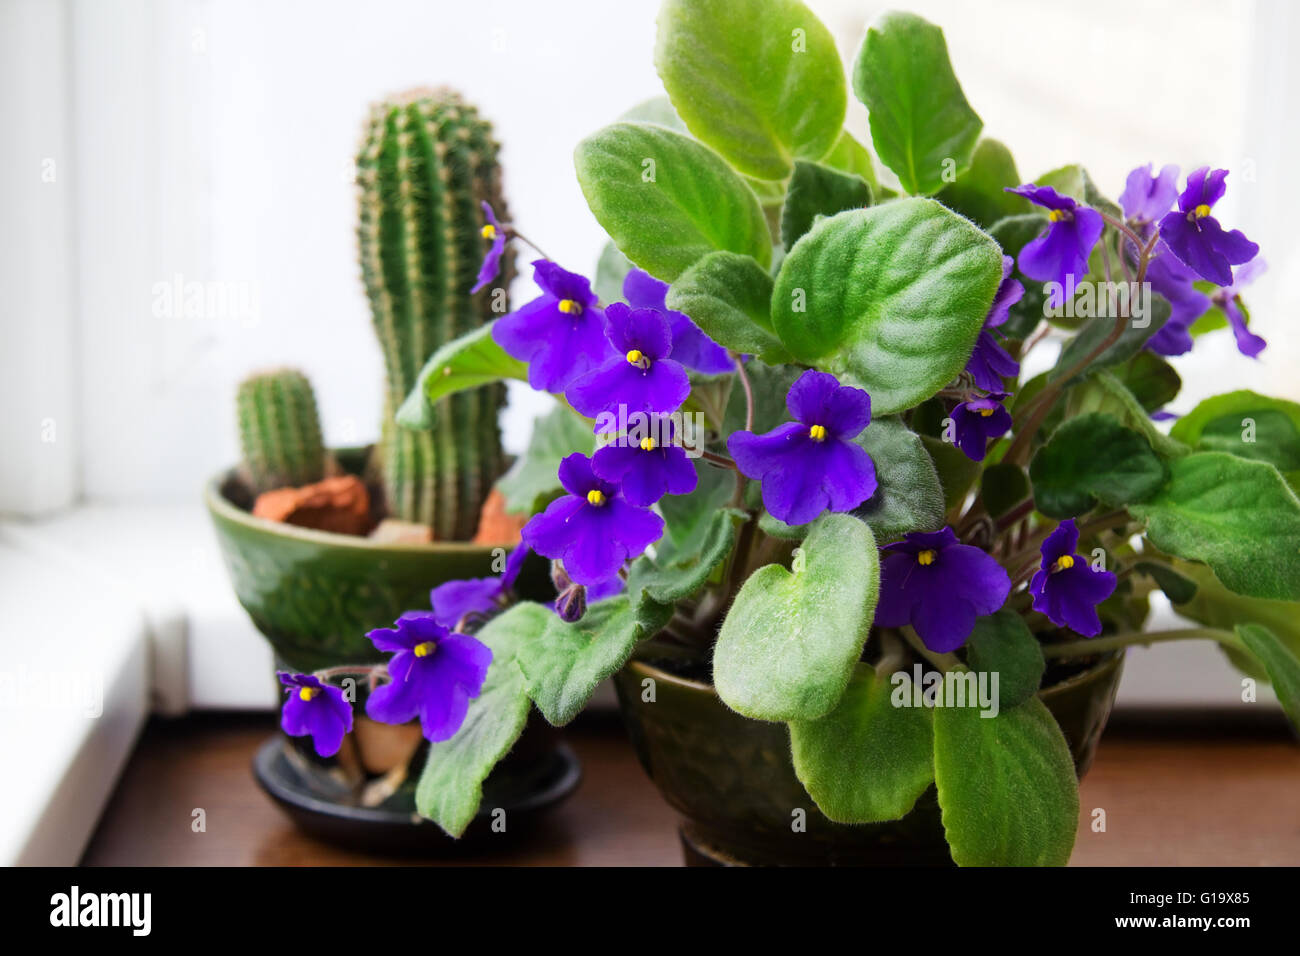 Potted African Violet (Saintpaulia) on the background of cactus, houseplants Stock Photo